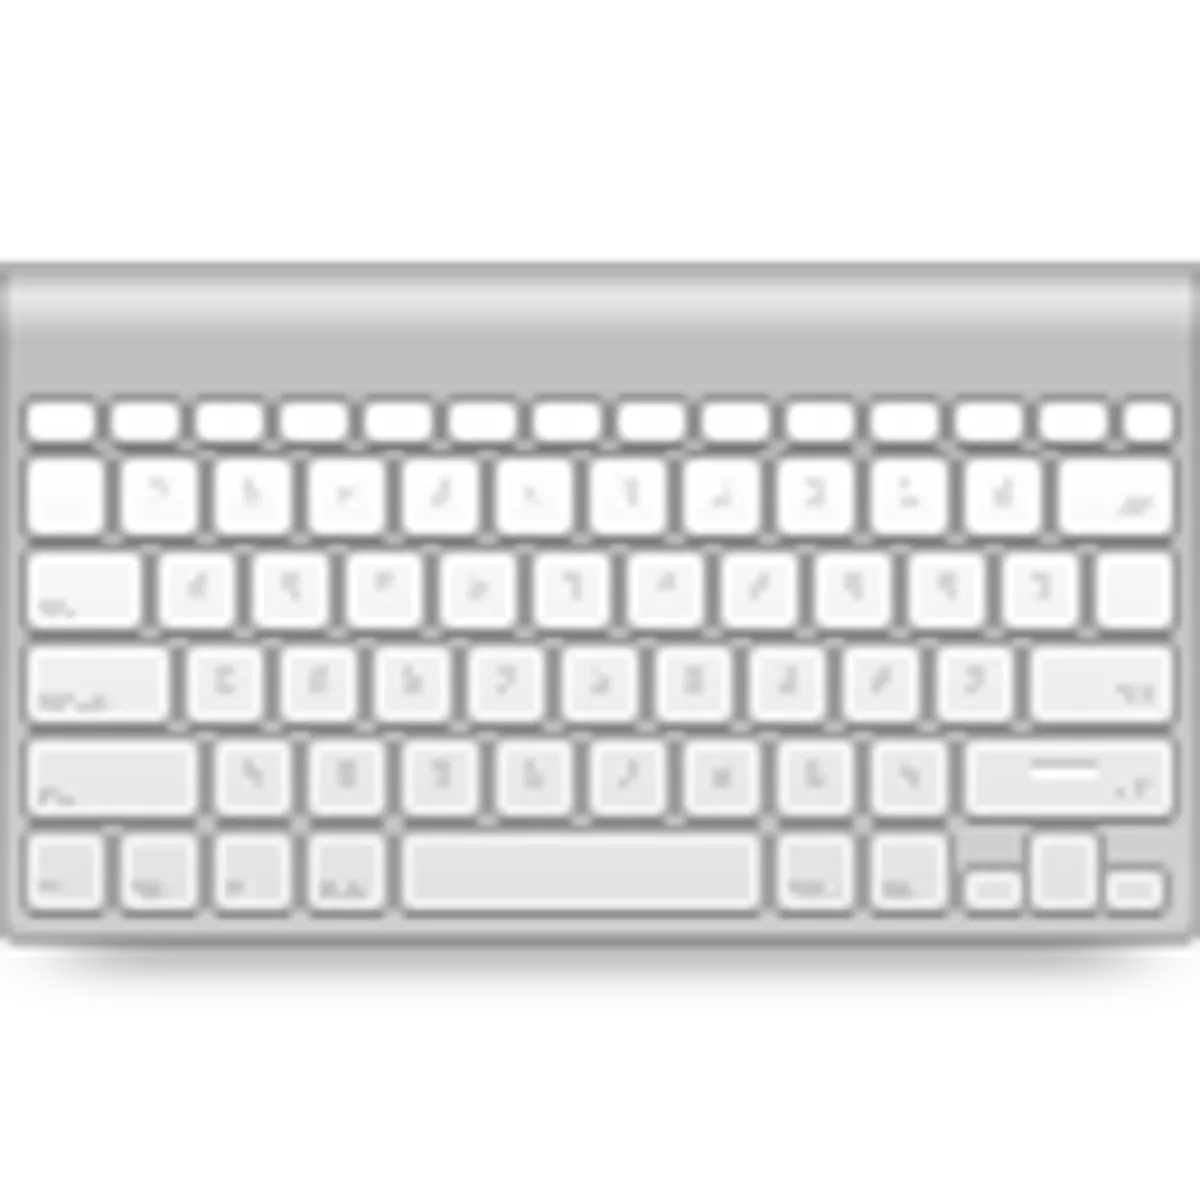 bluetooth-keyboard-not-recognized-at-startup-mac